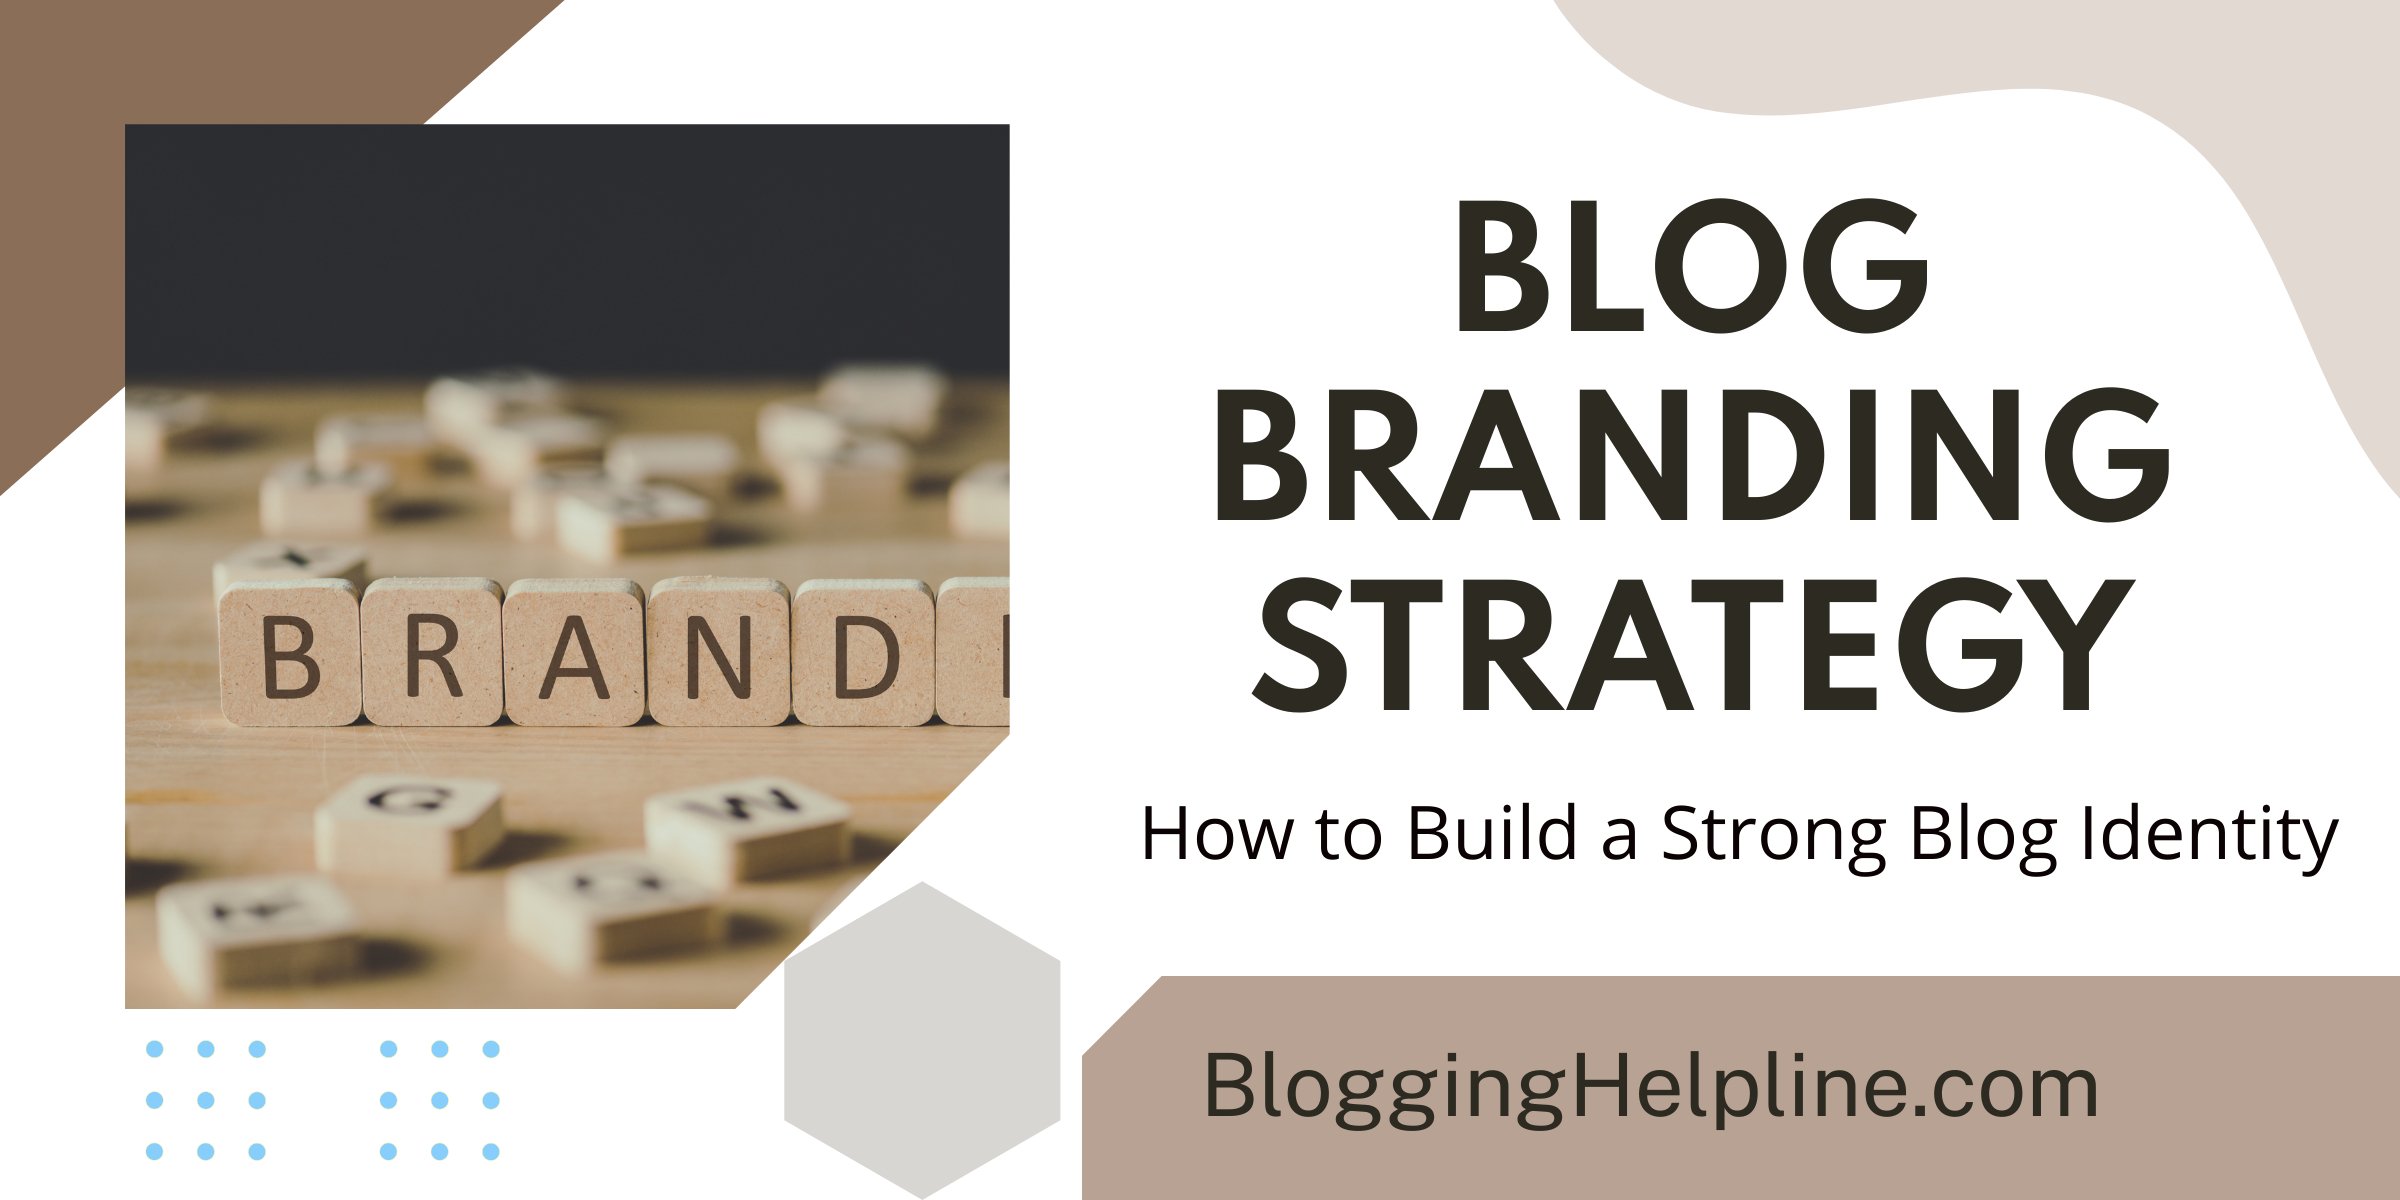 Blog Branding Strategy: How to Build a Strong Blog Identity